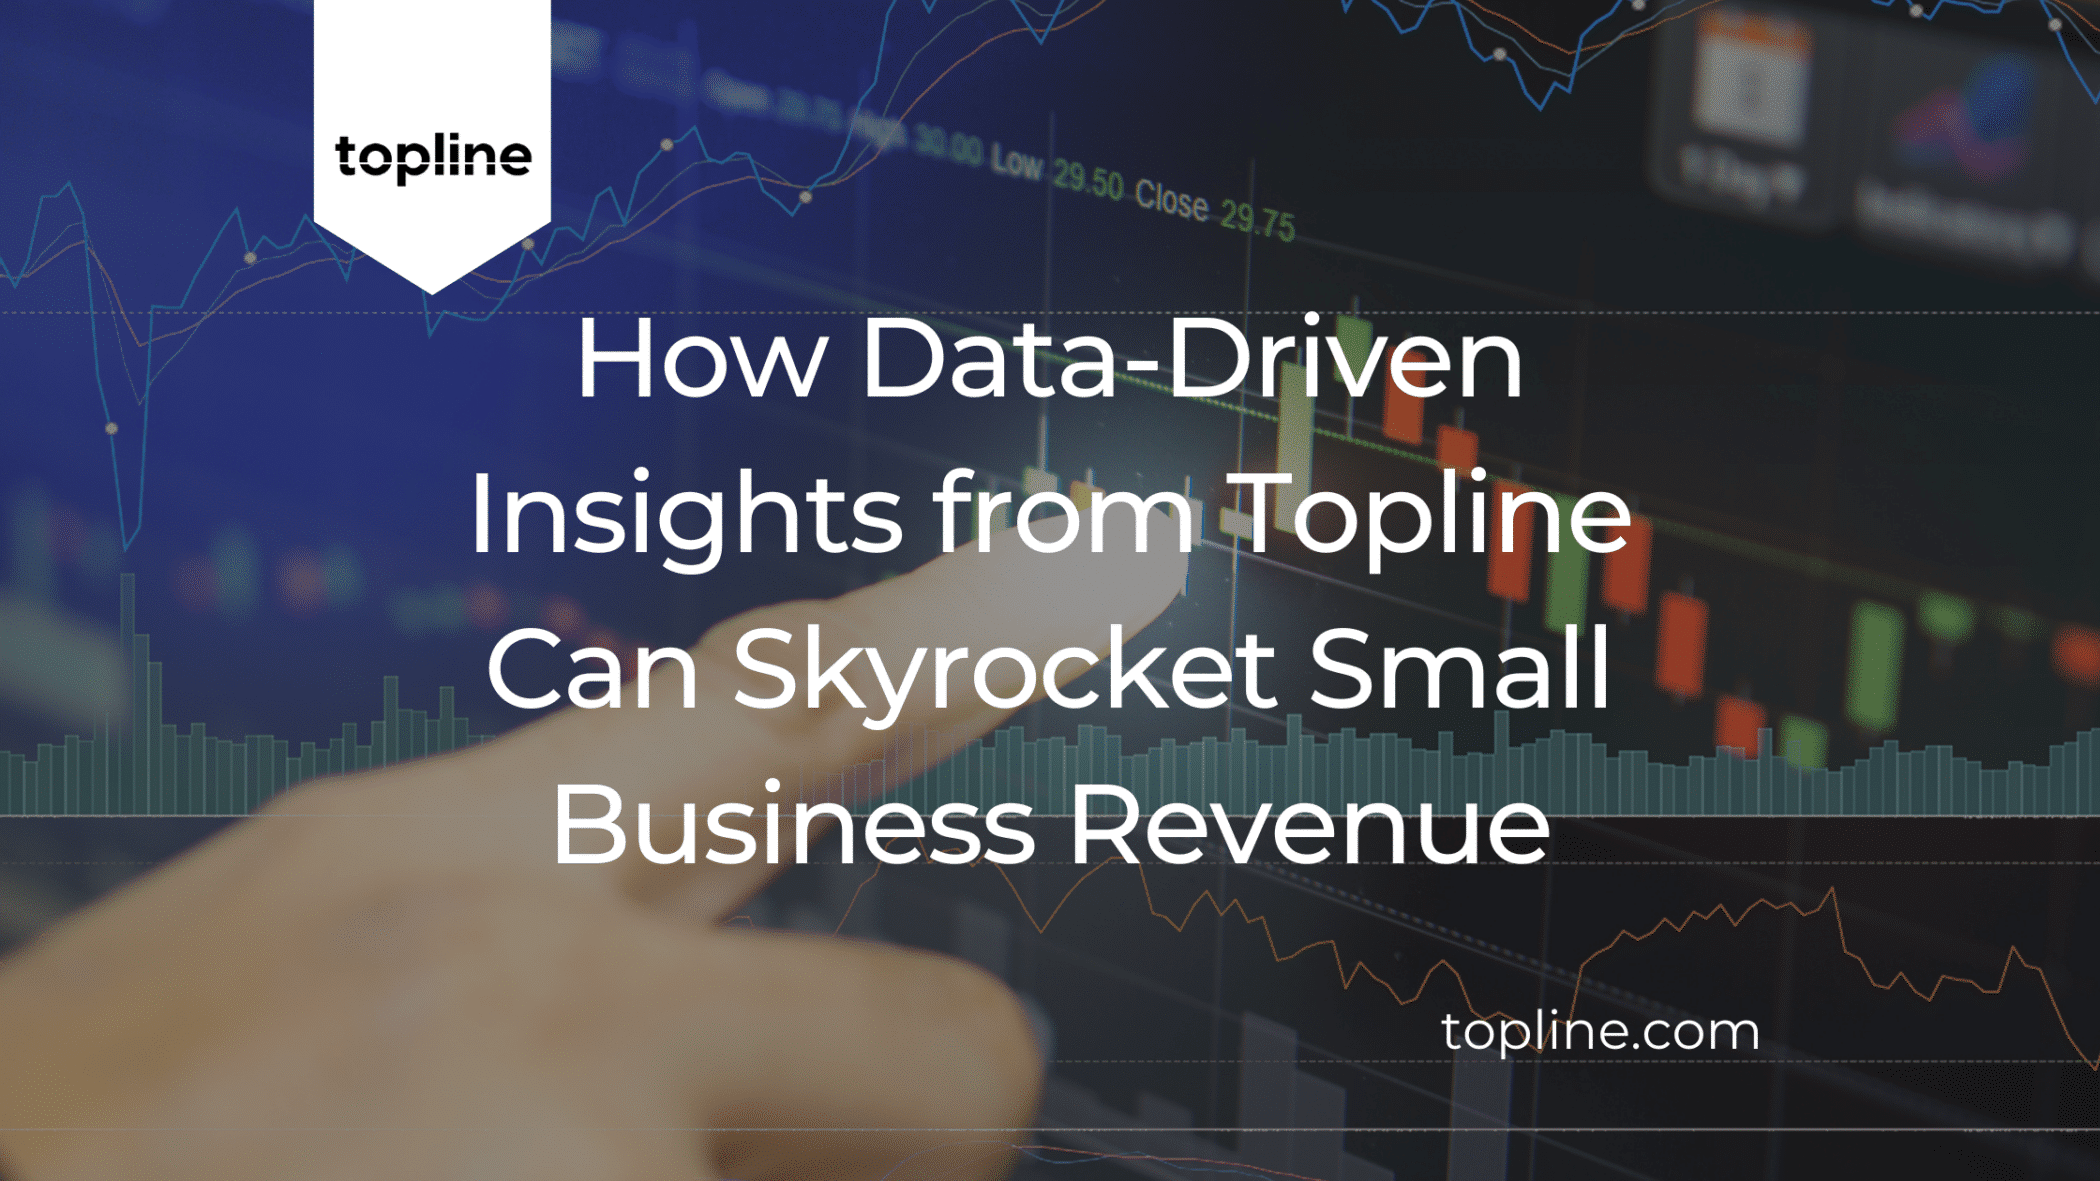 How Data-Driven Insights from Topline Can Skyrocket Small Business Revenue